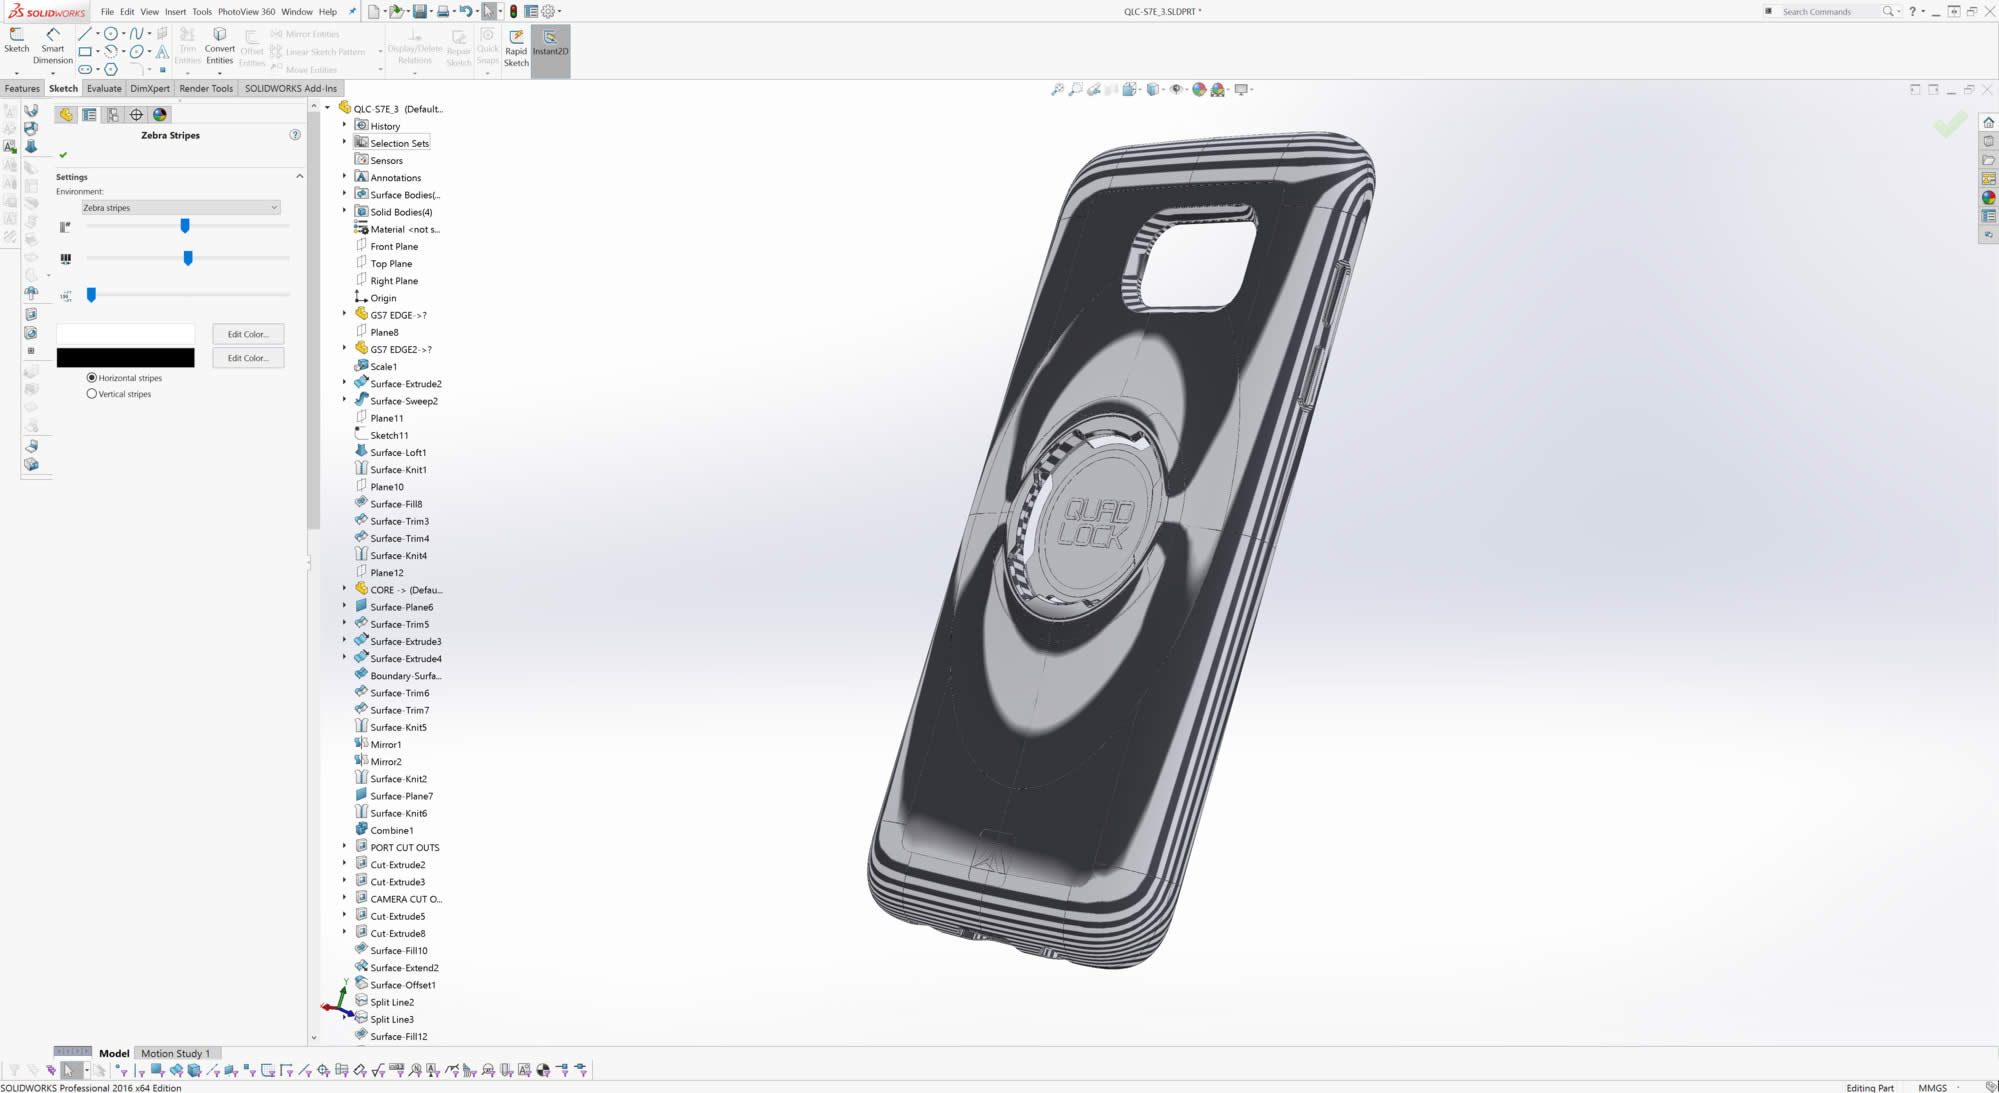 A picture of the prototype Quad Lock phone cases that originally started on KickStarter